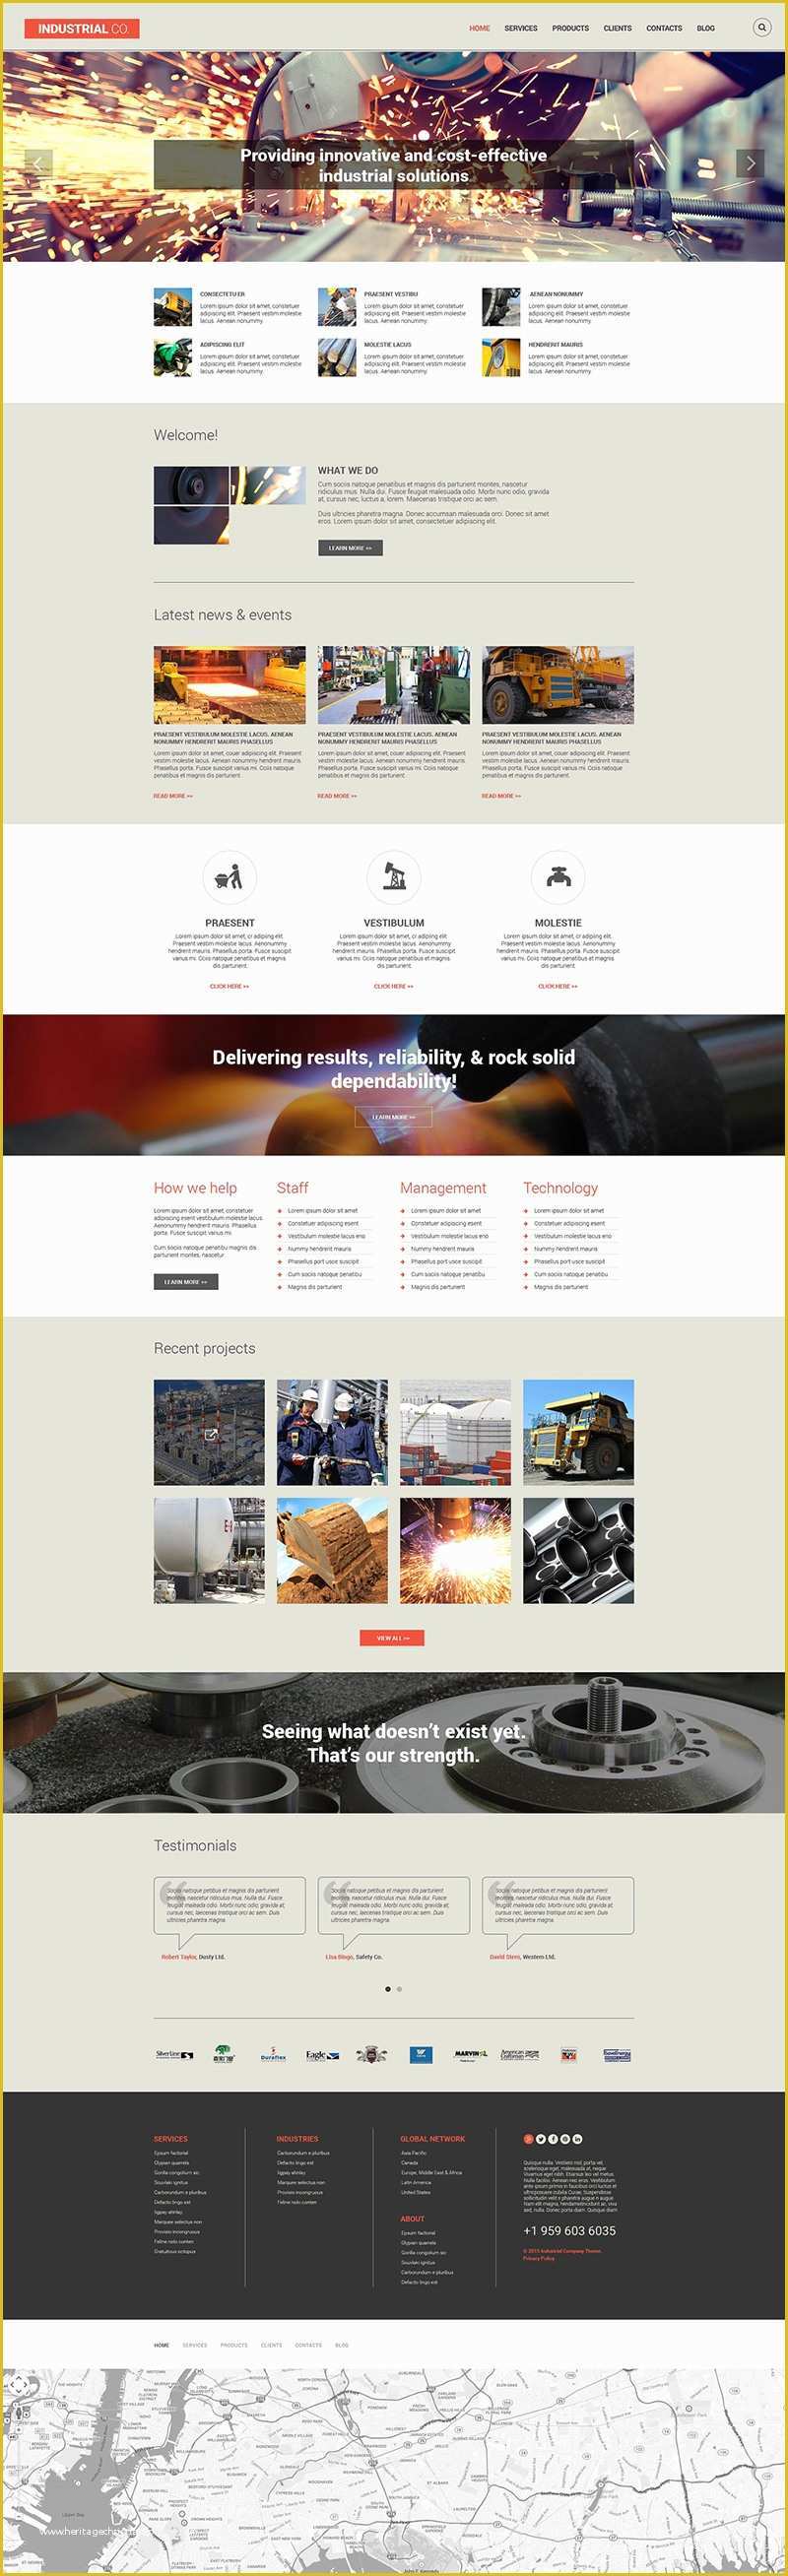 Free Drupal 8 Templates Of 6 Industrial Drupal themes Free & Premium Templates